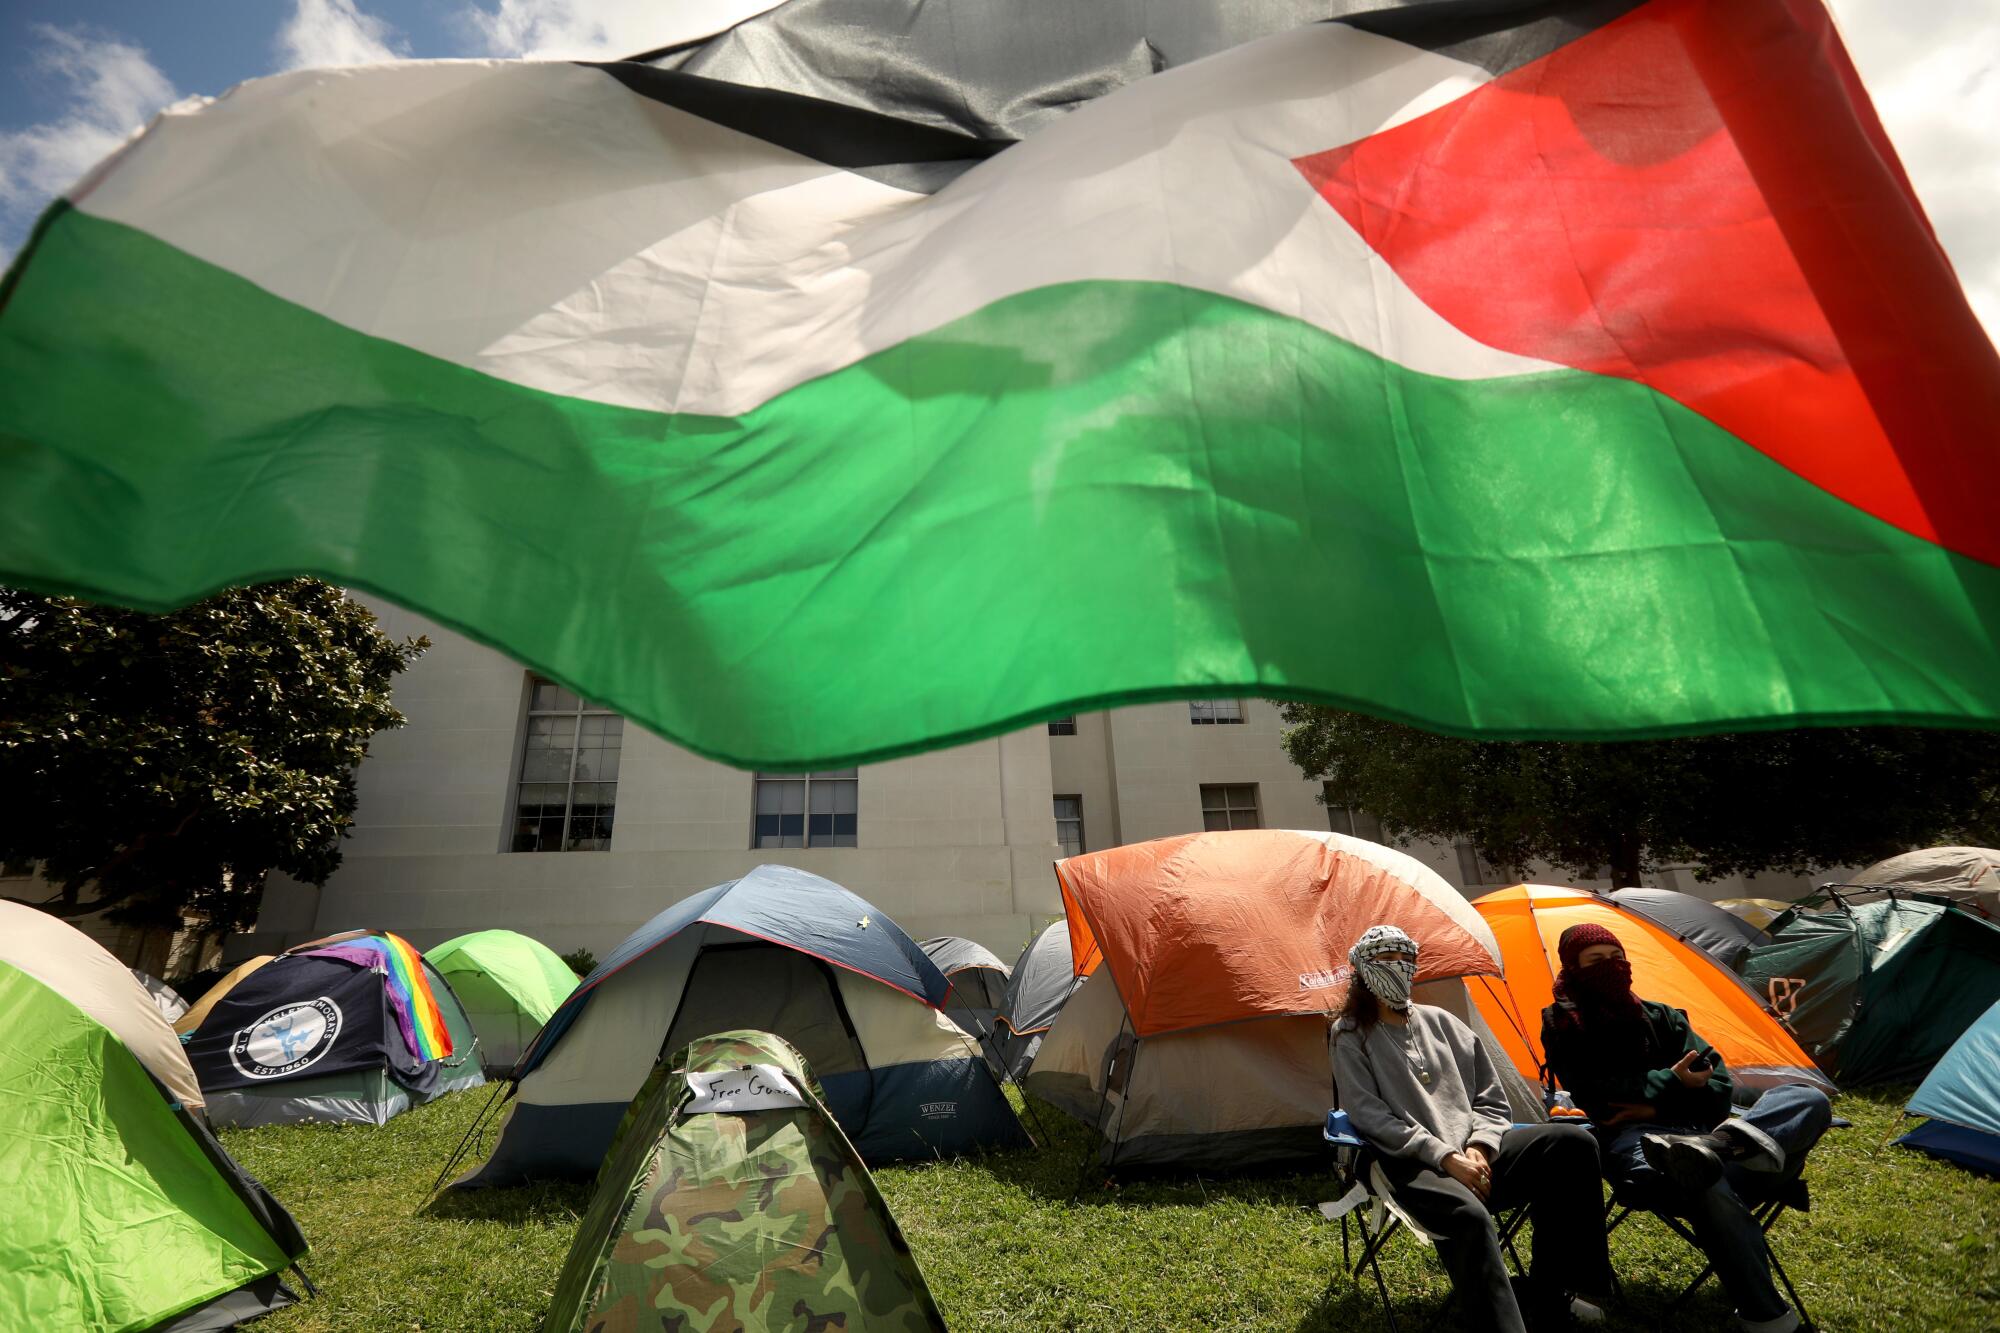 A Palestinian flag flies over tents at UC Berkeley.